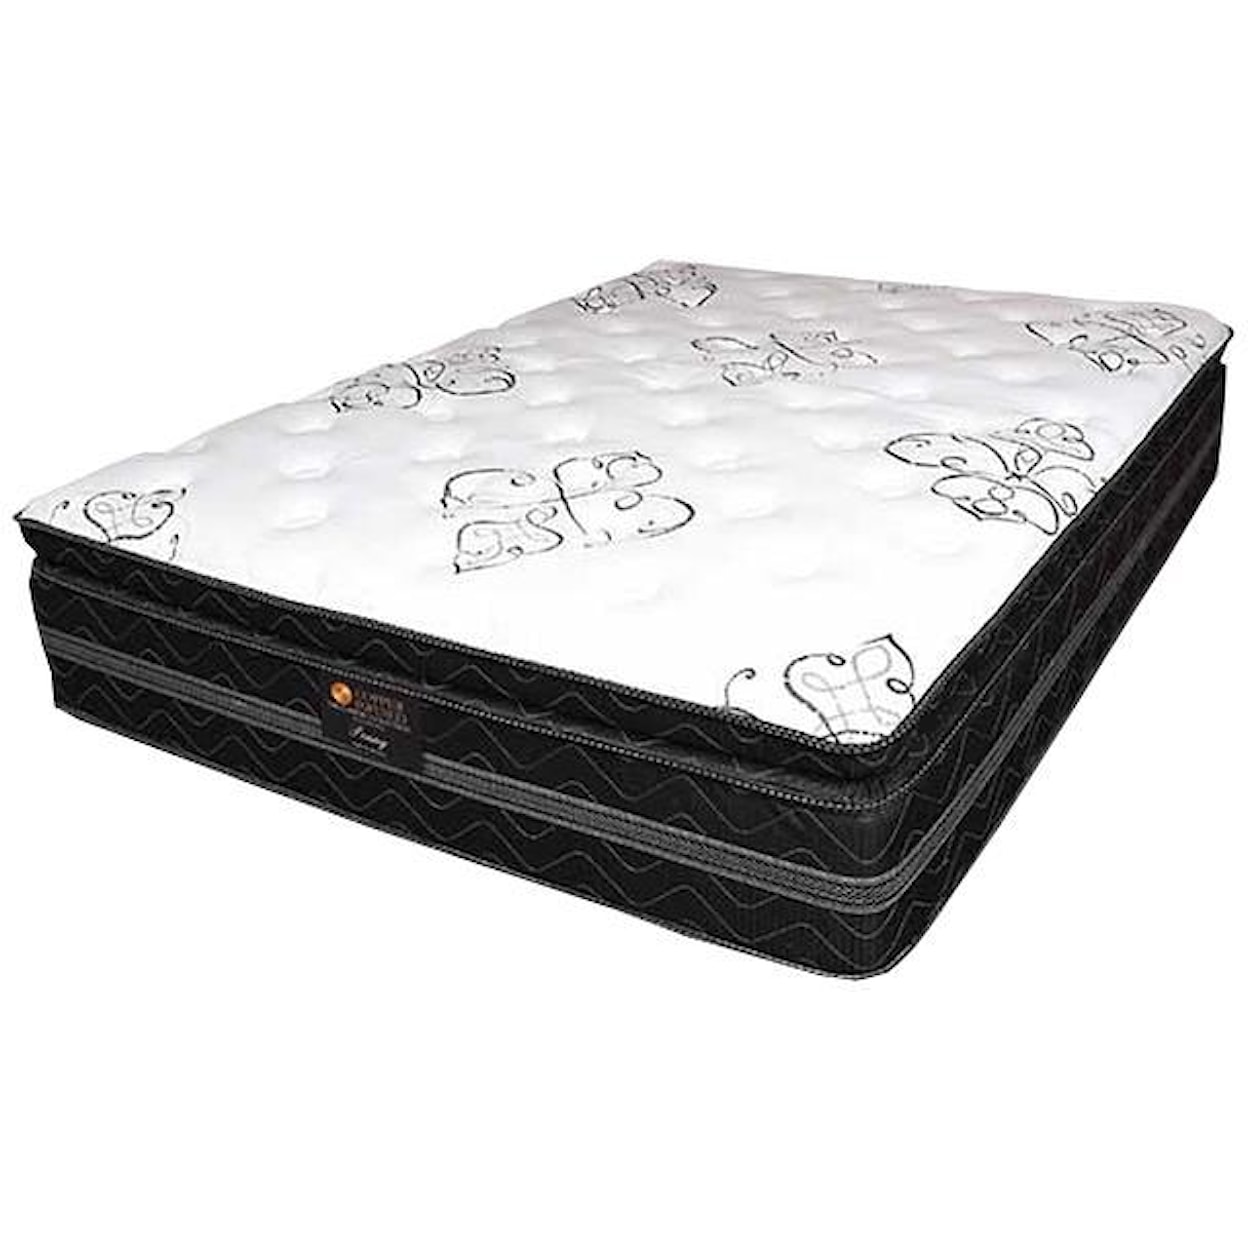 United Bedding Penny PSBT King Pocketed Coil Mattress